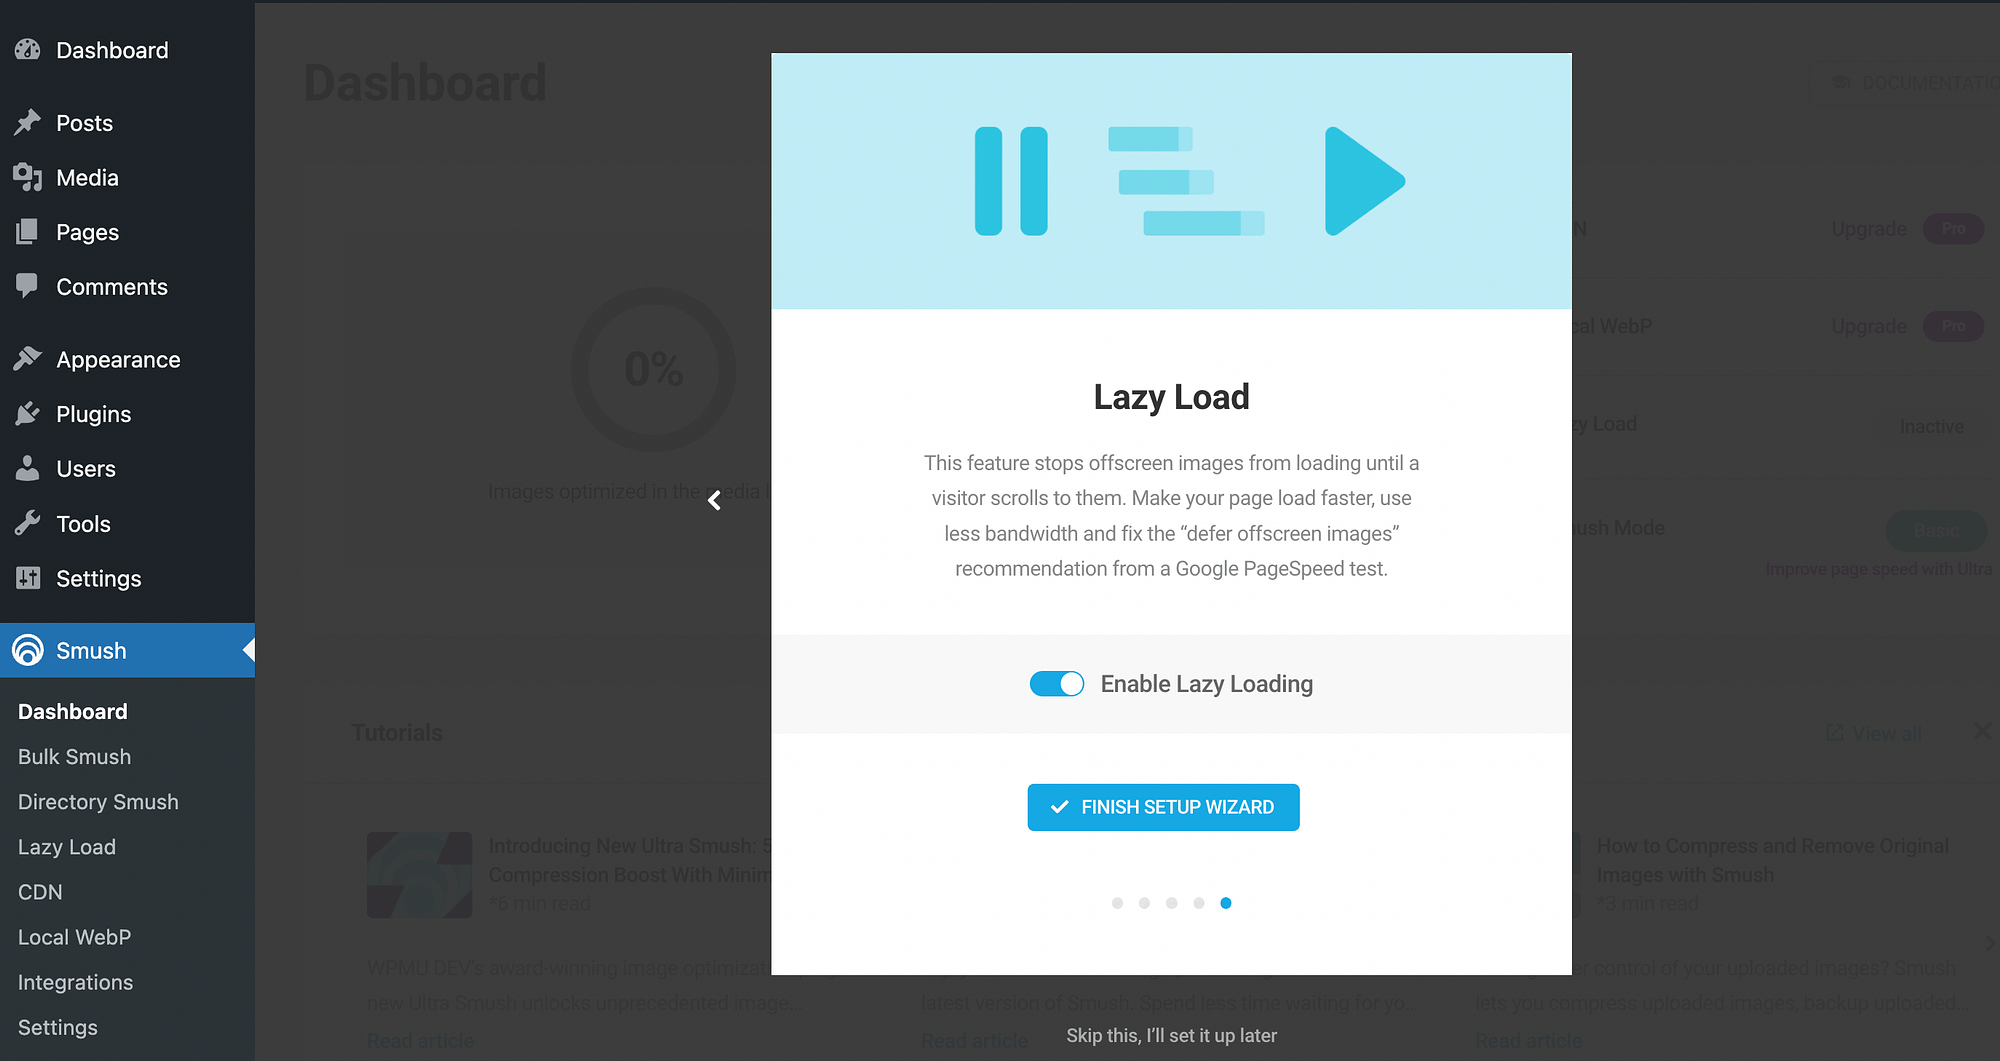 Enable lazy loading in Smush's setup wizard.